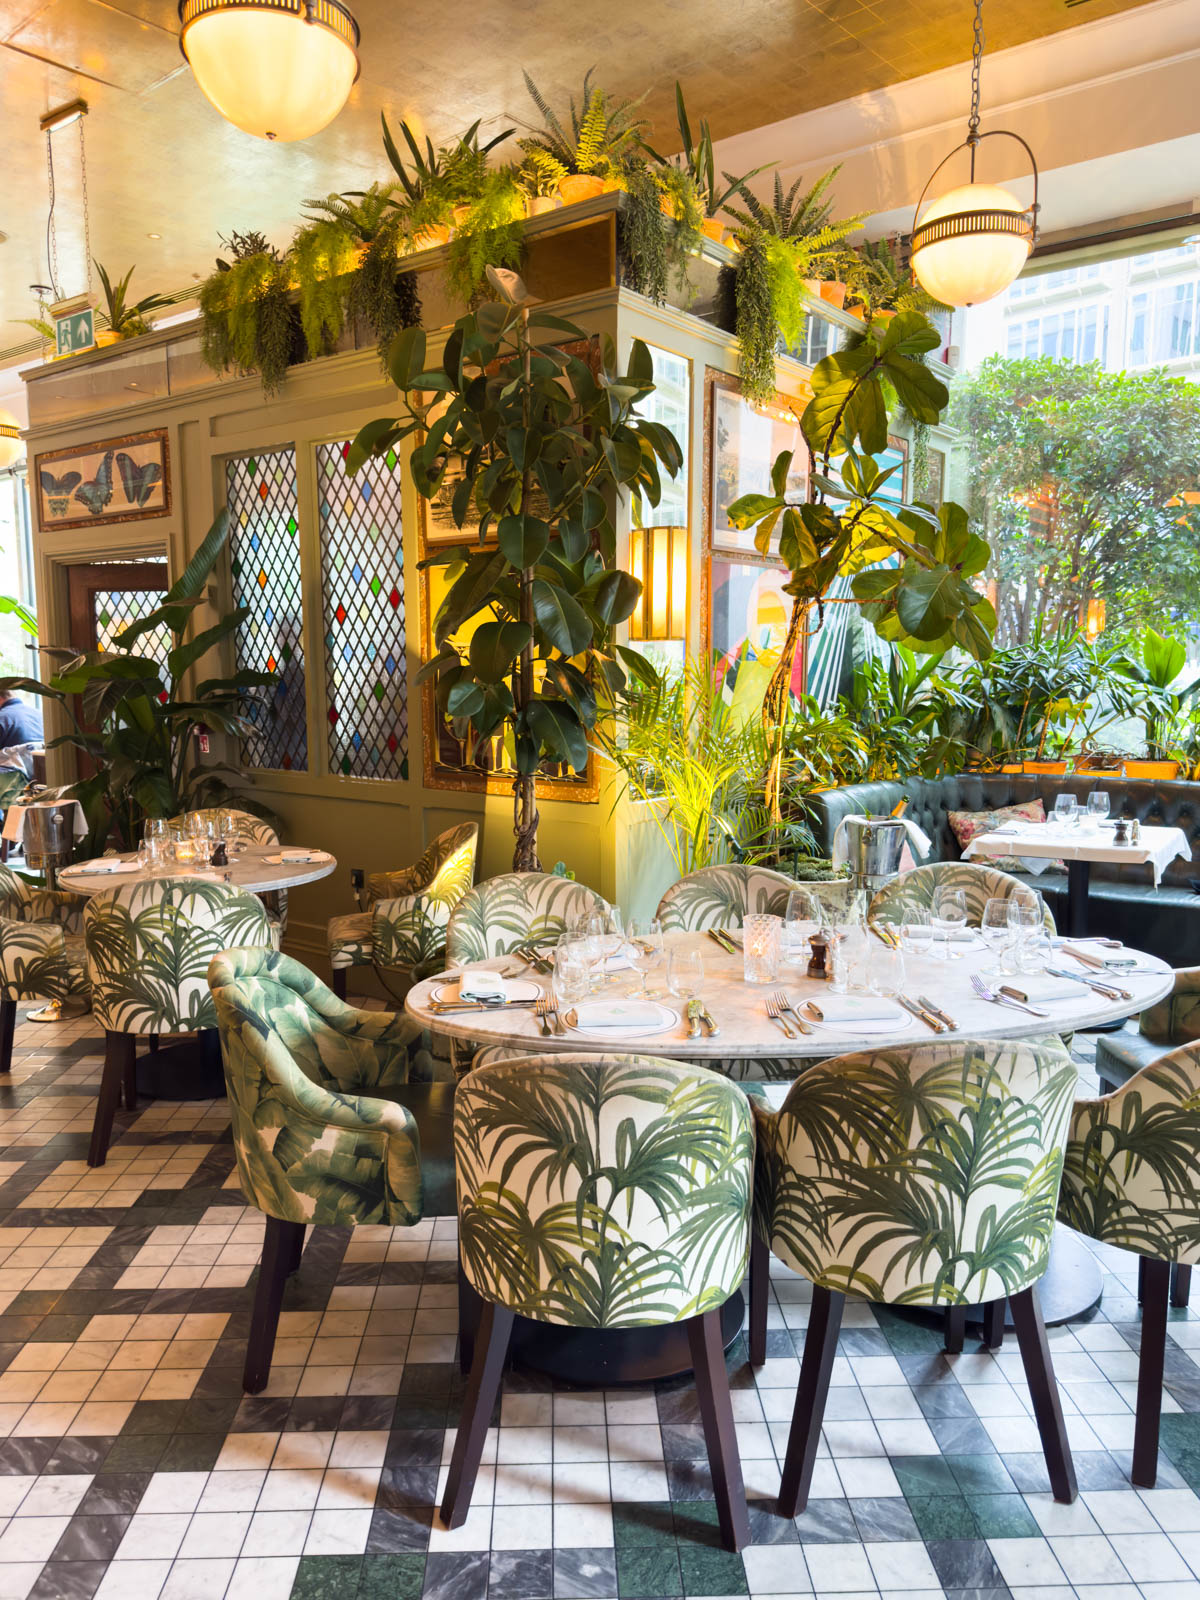 The ivy-covered dining room inside the Ivy restaurant in London.